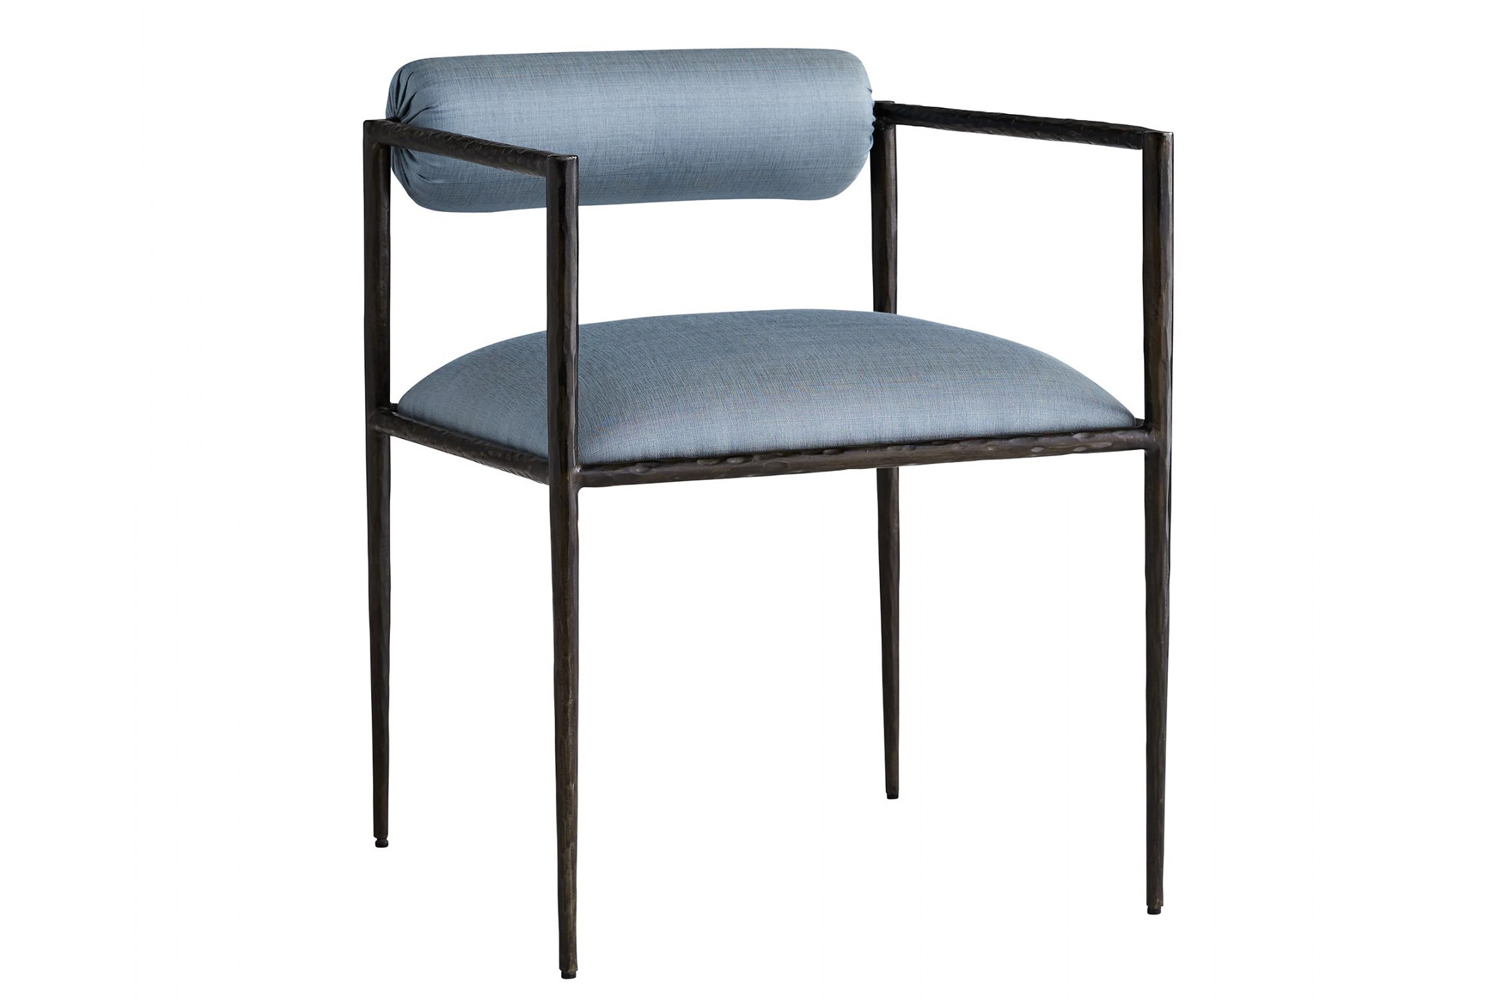 Arteriors launched the Barbana chair 